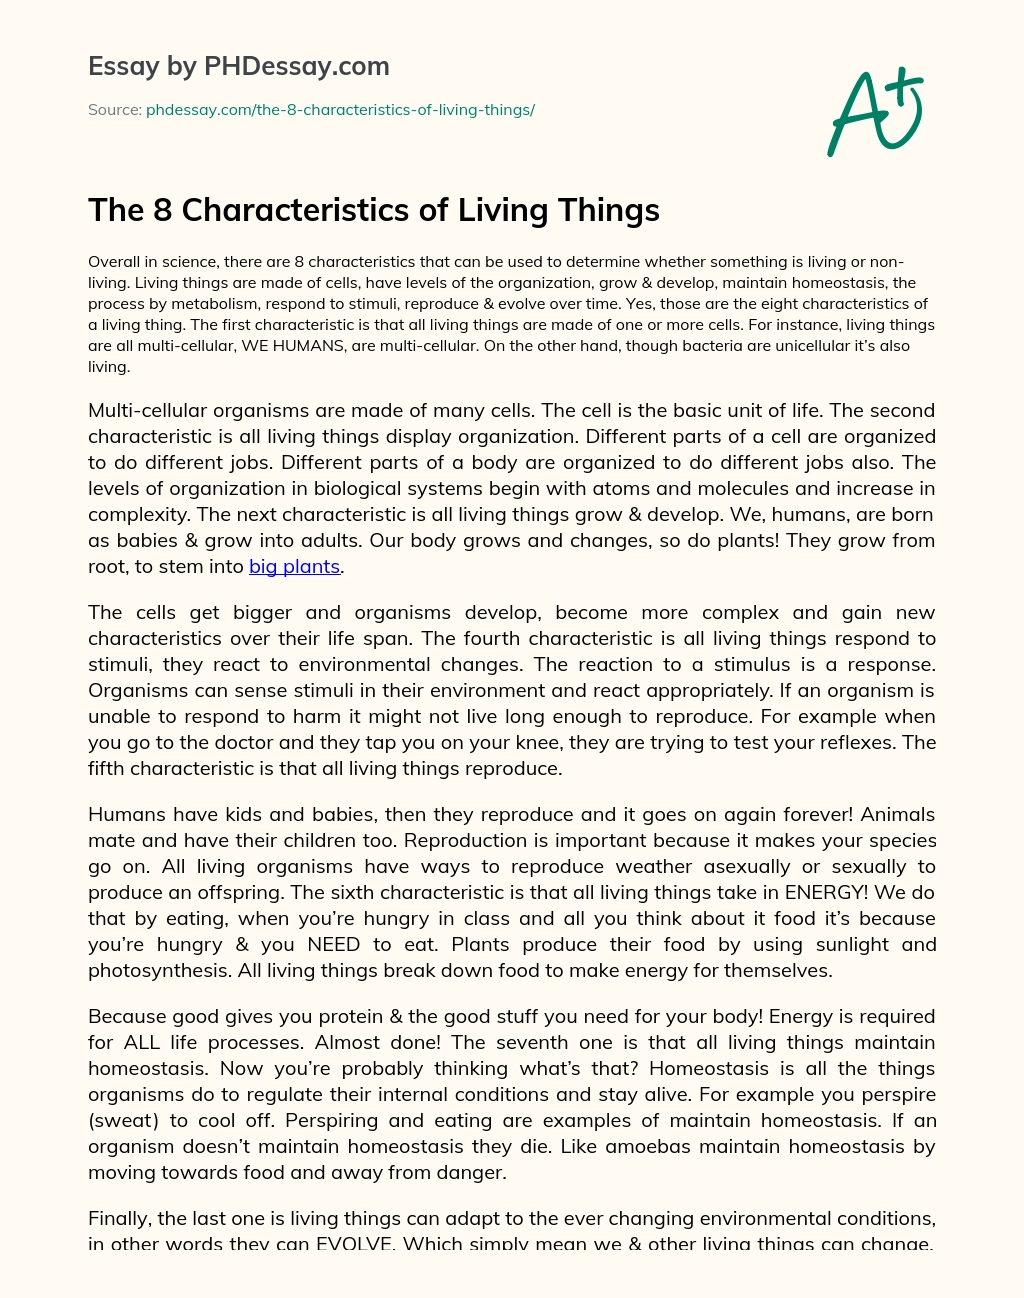 characteristics of living beings essay